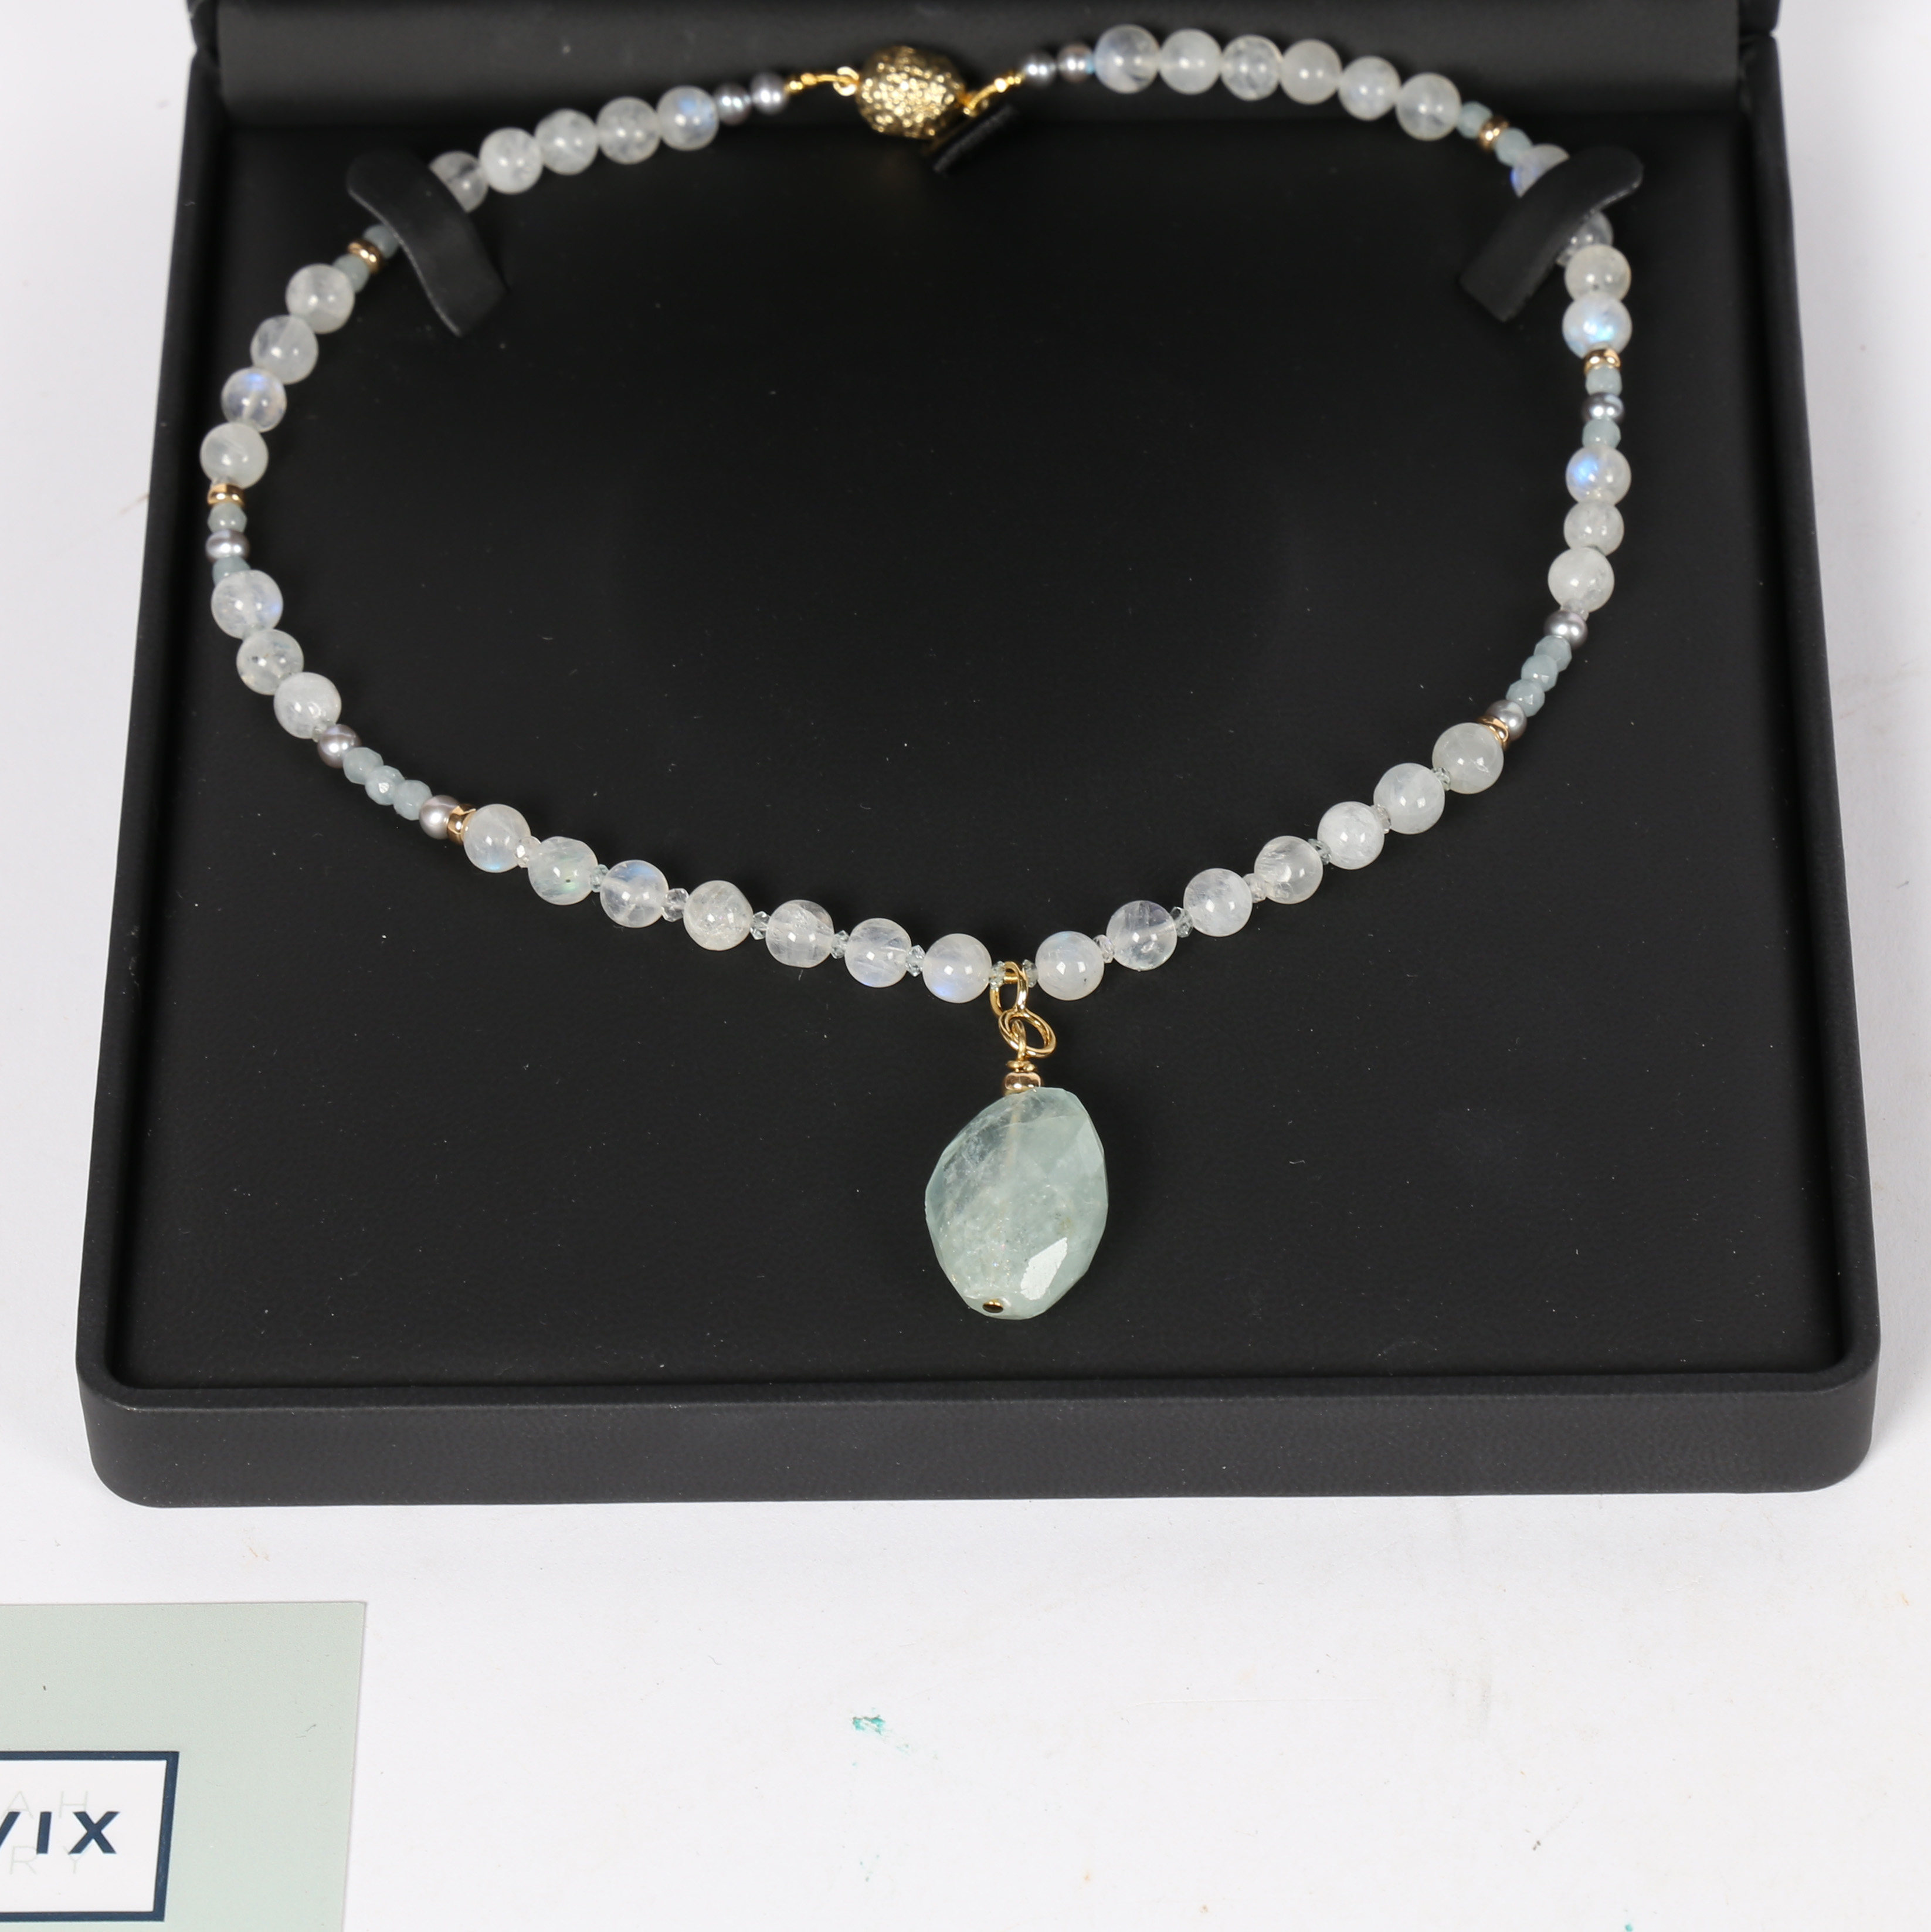 A UNIQUE ONE-OF-A-KIND MOONSTONE NECKLACE - Image 7 of 10